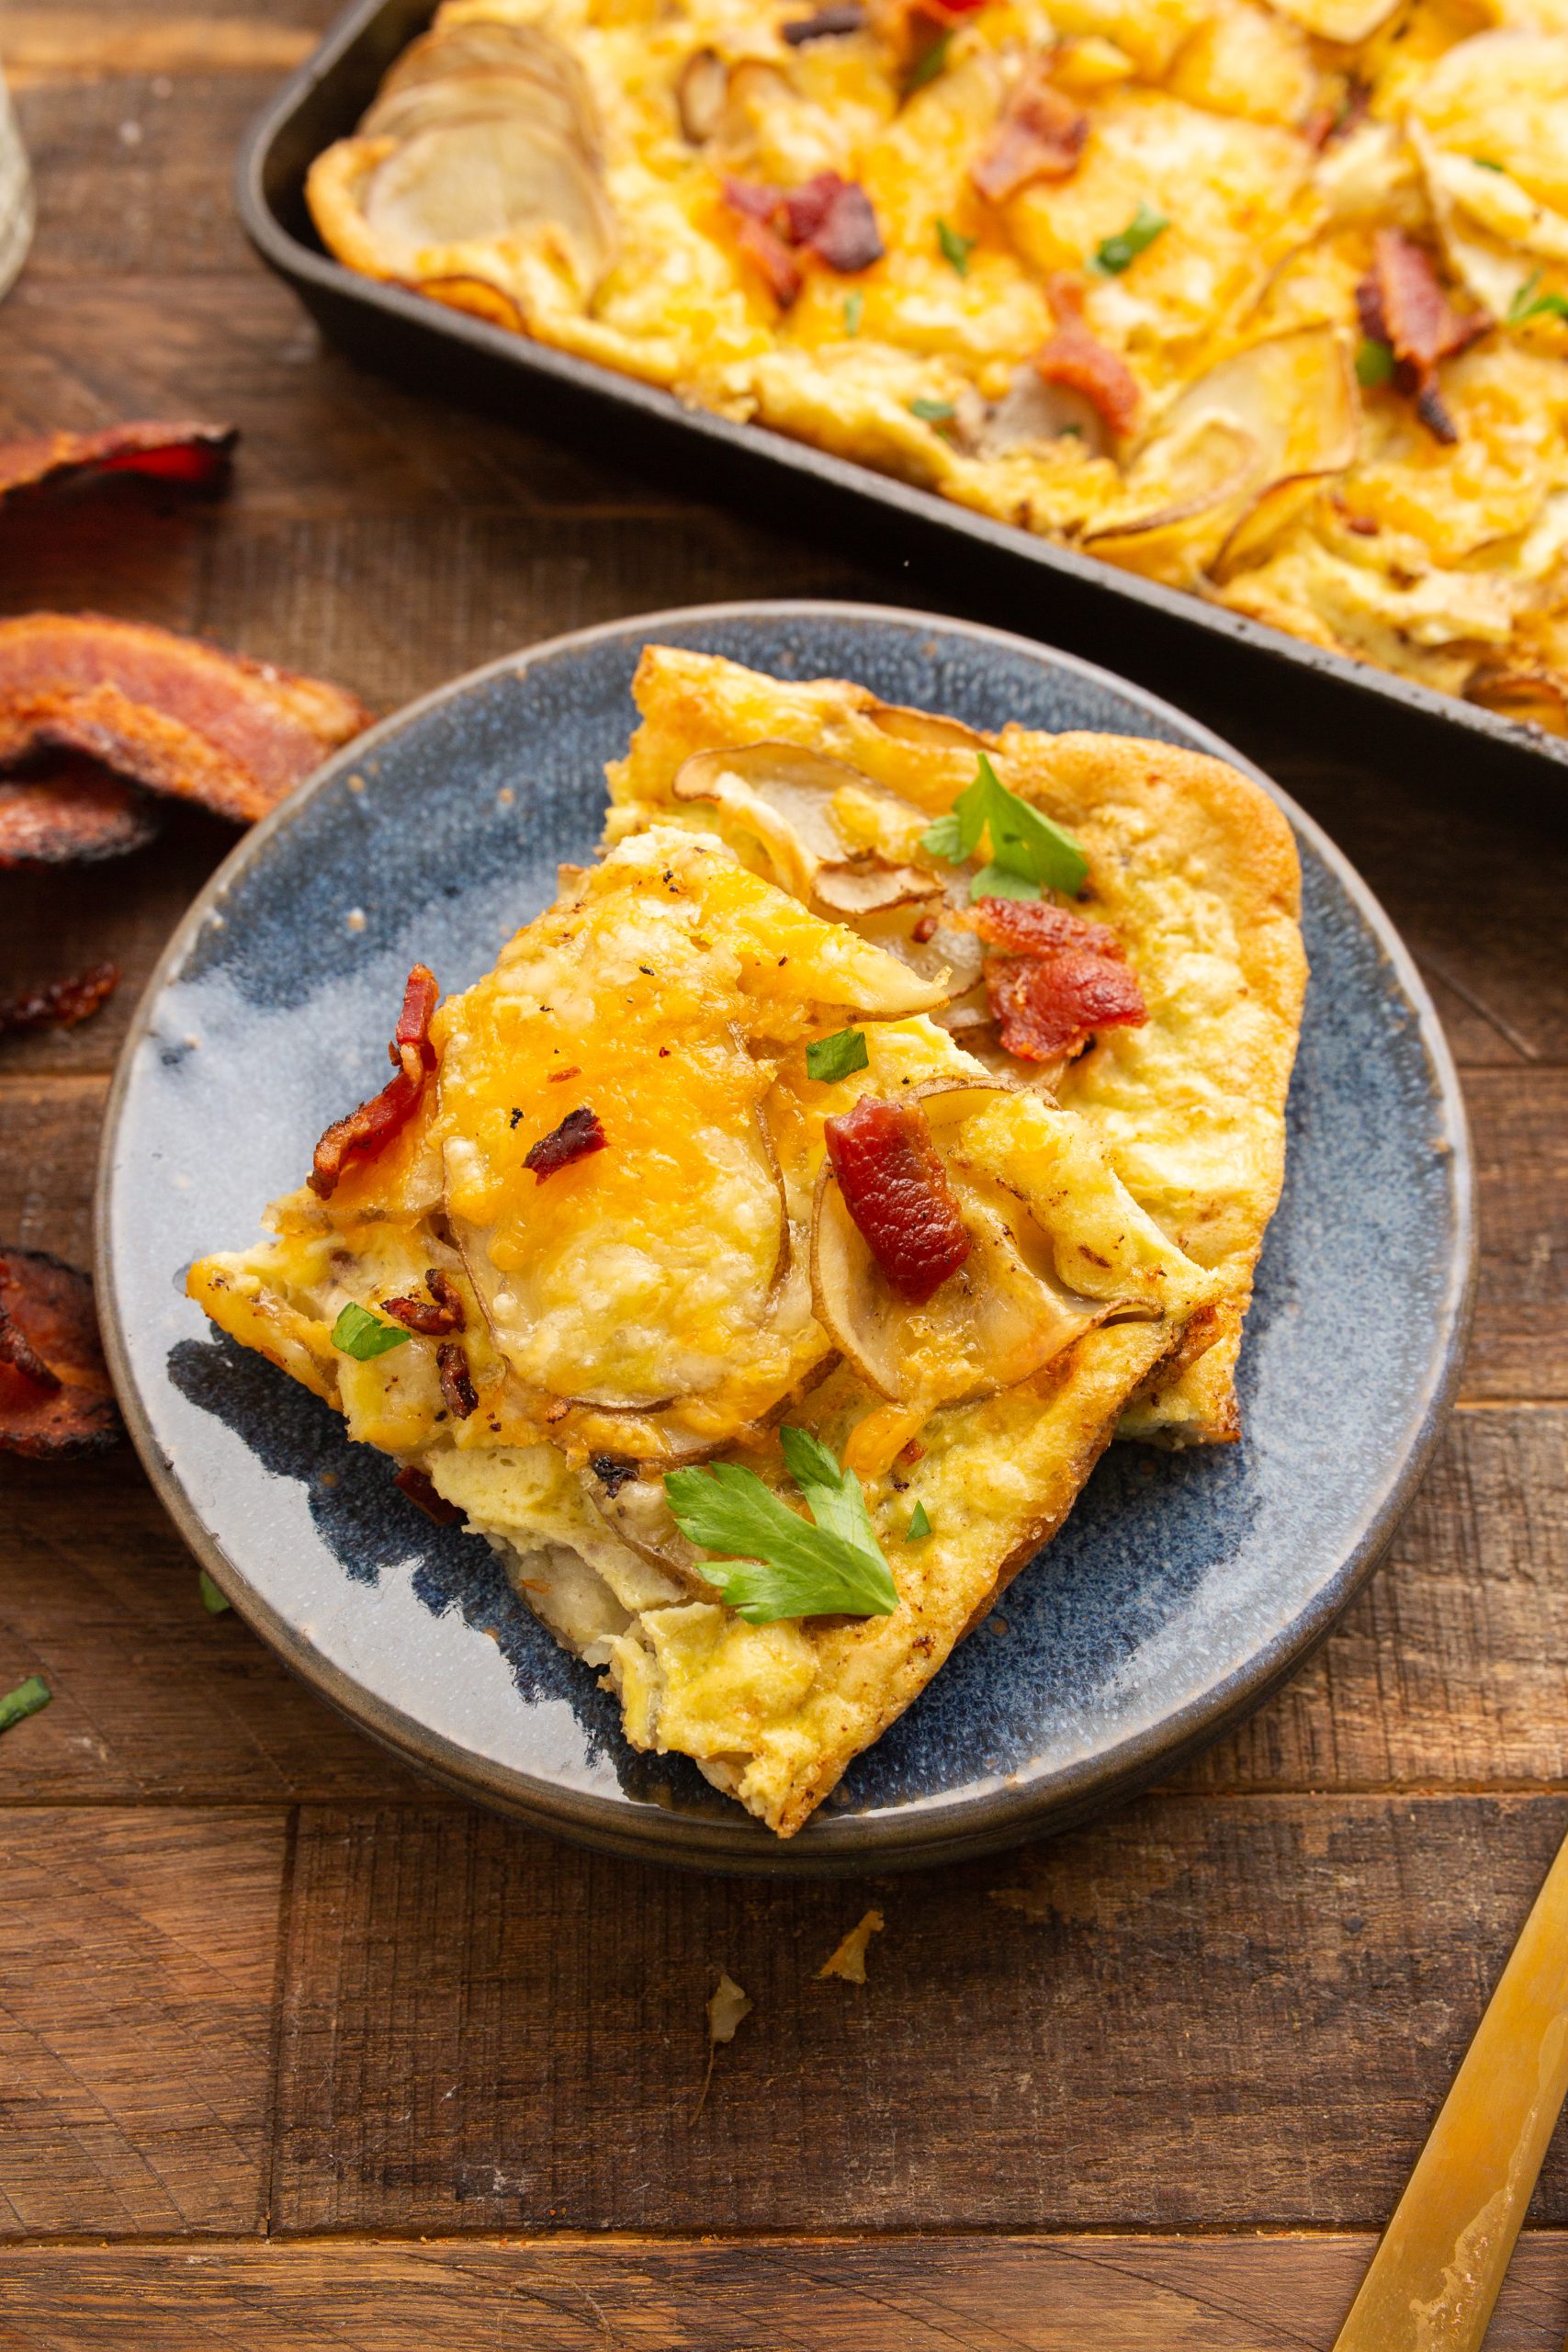 A slice of potato and bacon breakfast pizza on a blue plate next to a baking sheet with more pizza. The pizza has a golden crust, melted cheese, and garnished with parsley. A knife and bacon strips are nearby.